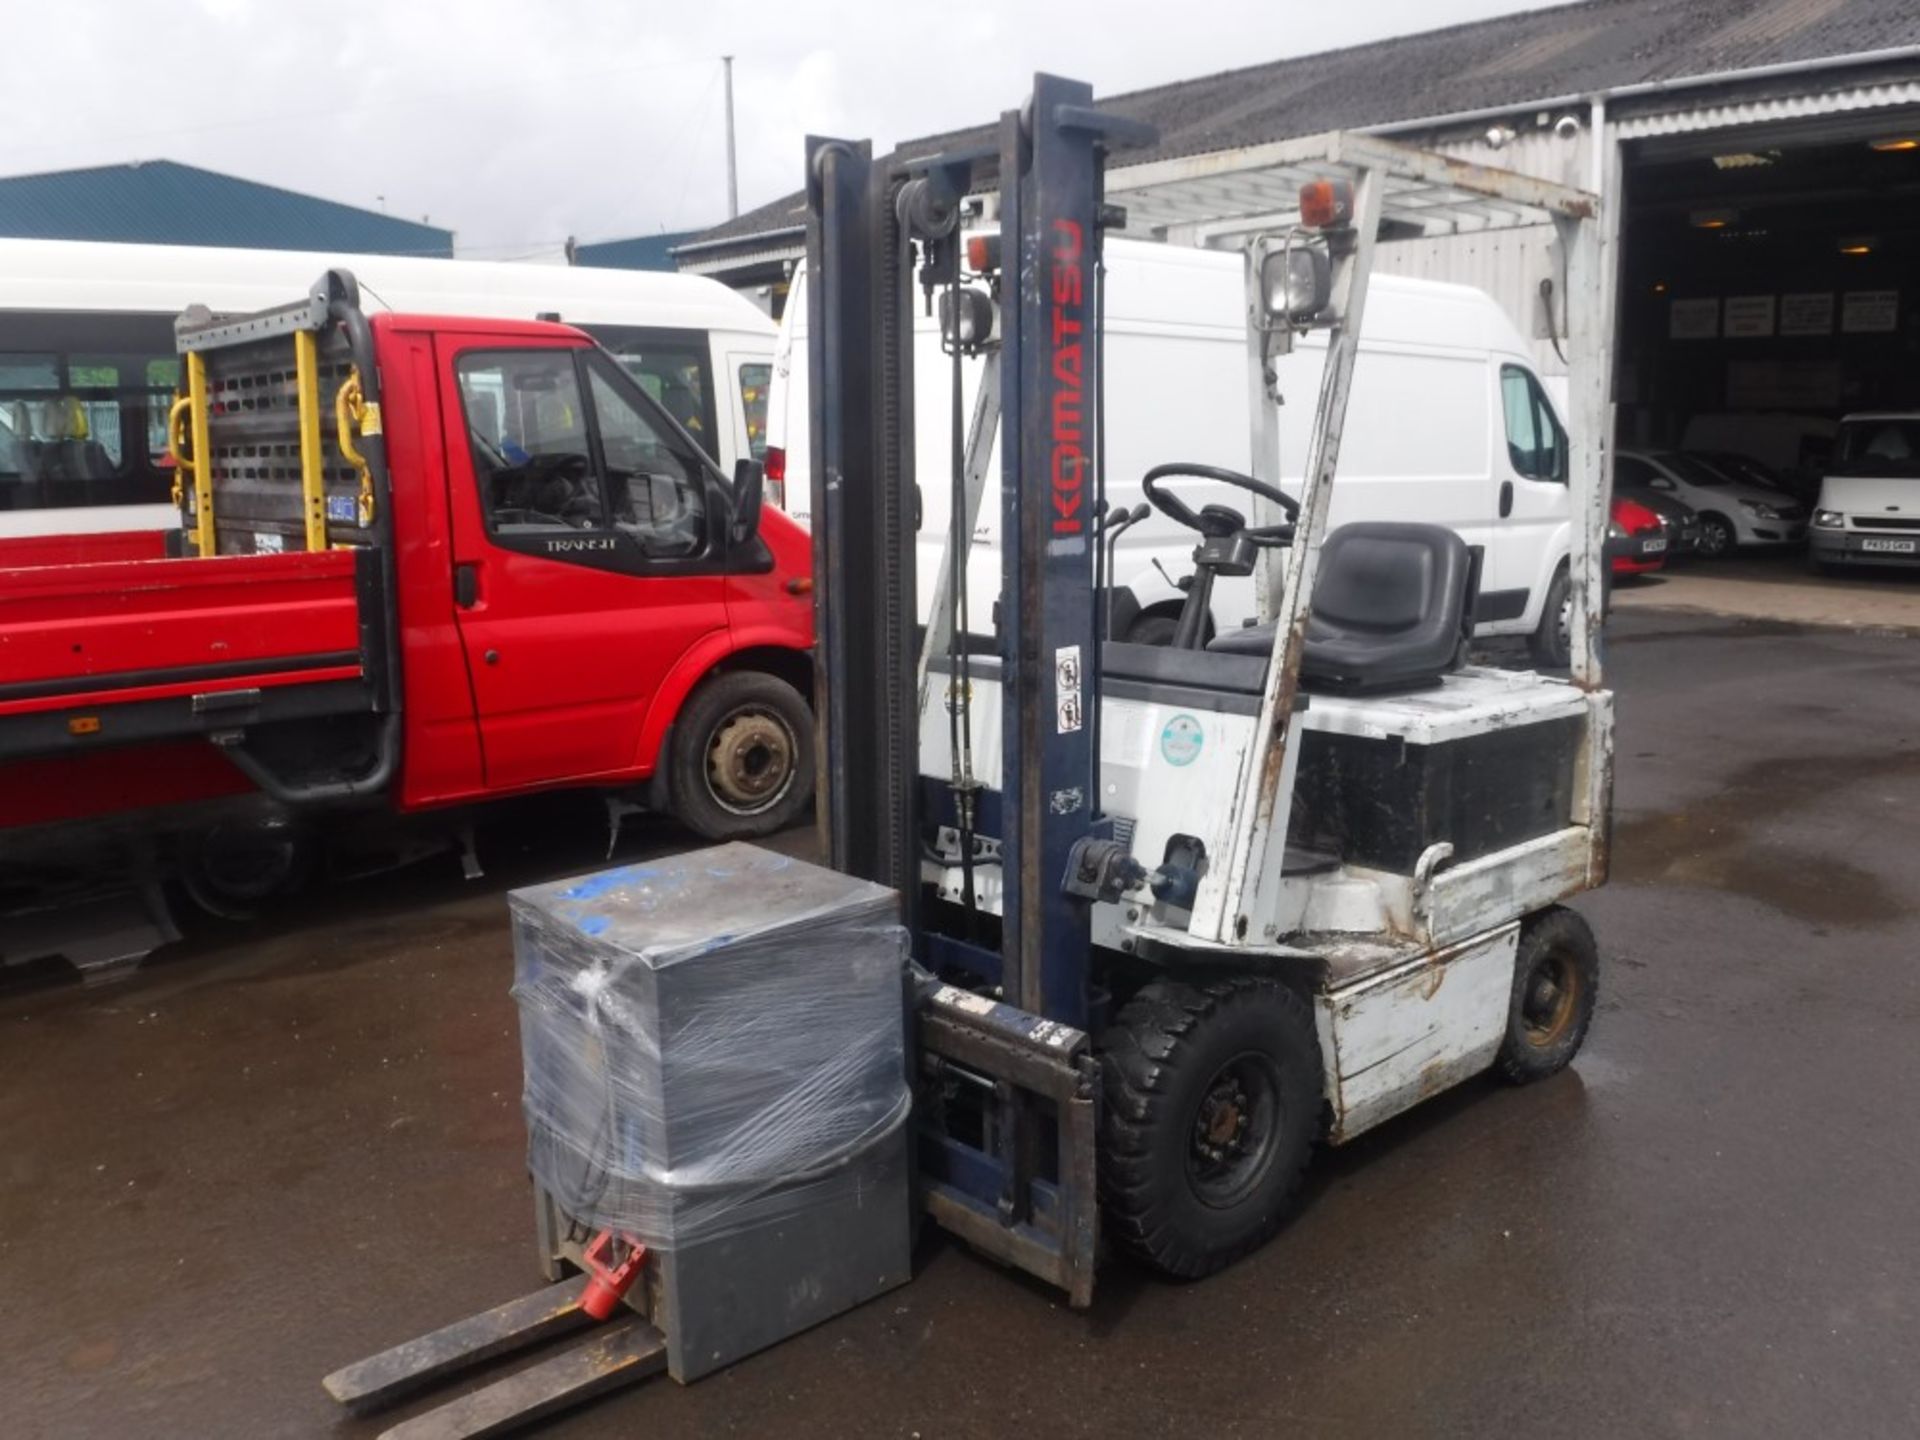 KOMATSU 1.5 TON ELECTRIC FORKLIFT WITH CHARGER, 14791 HOURS [NO VAT] - Image 2 of 4